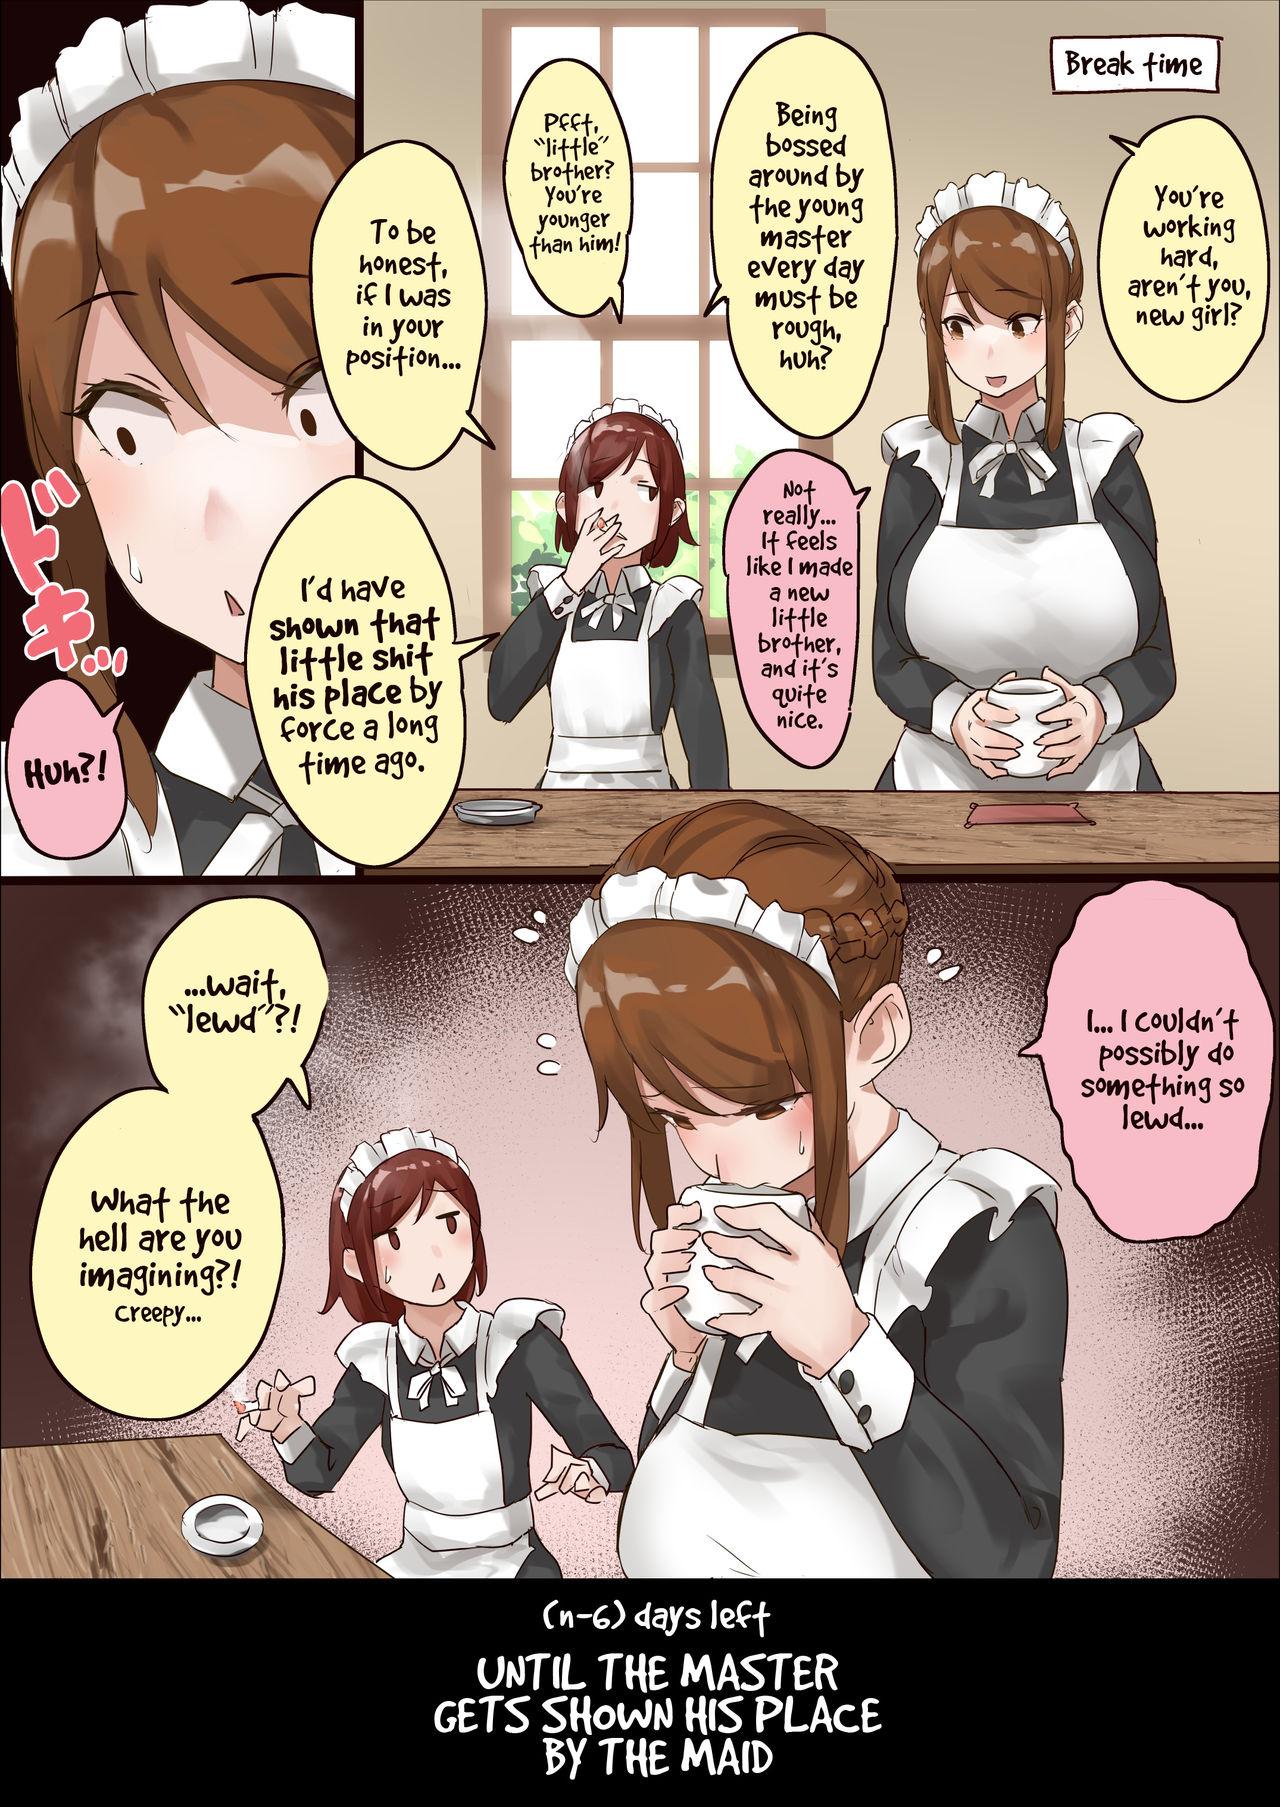 Off master and maid - Original Stretching - Page 7